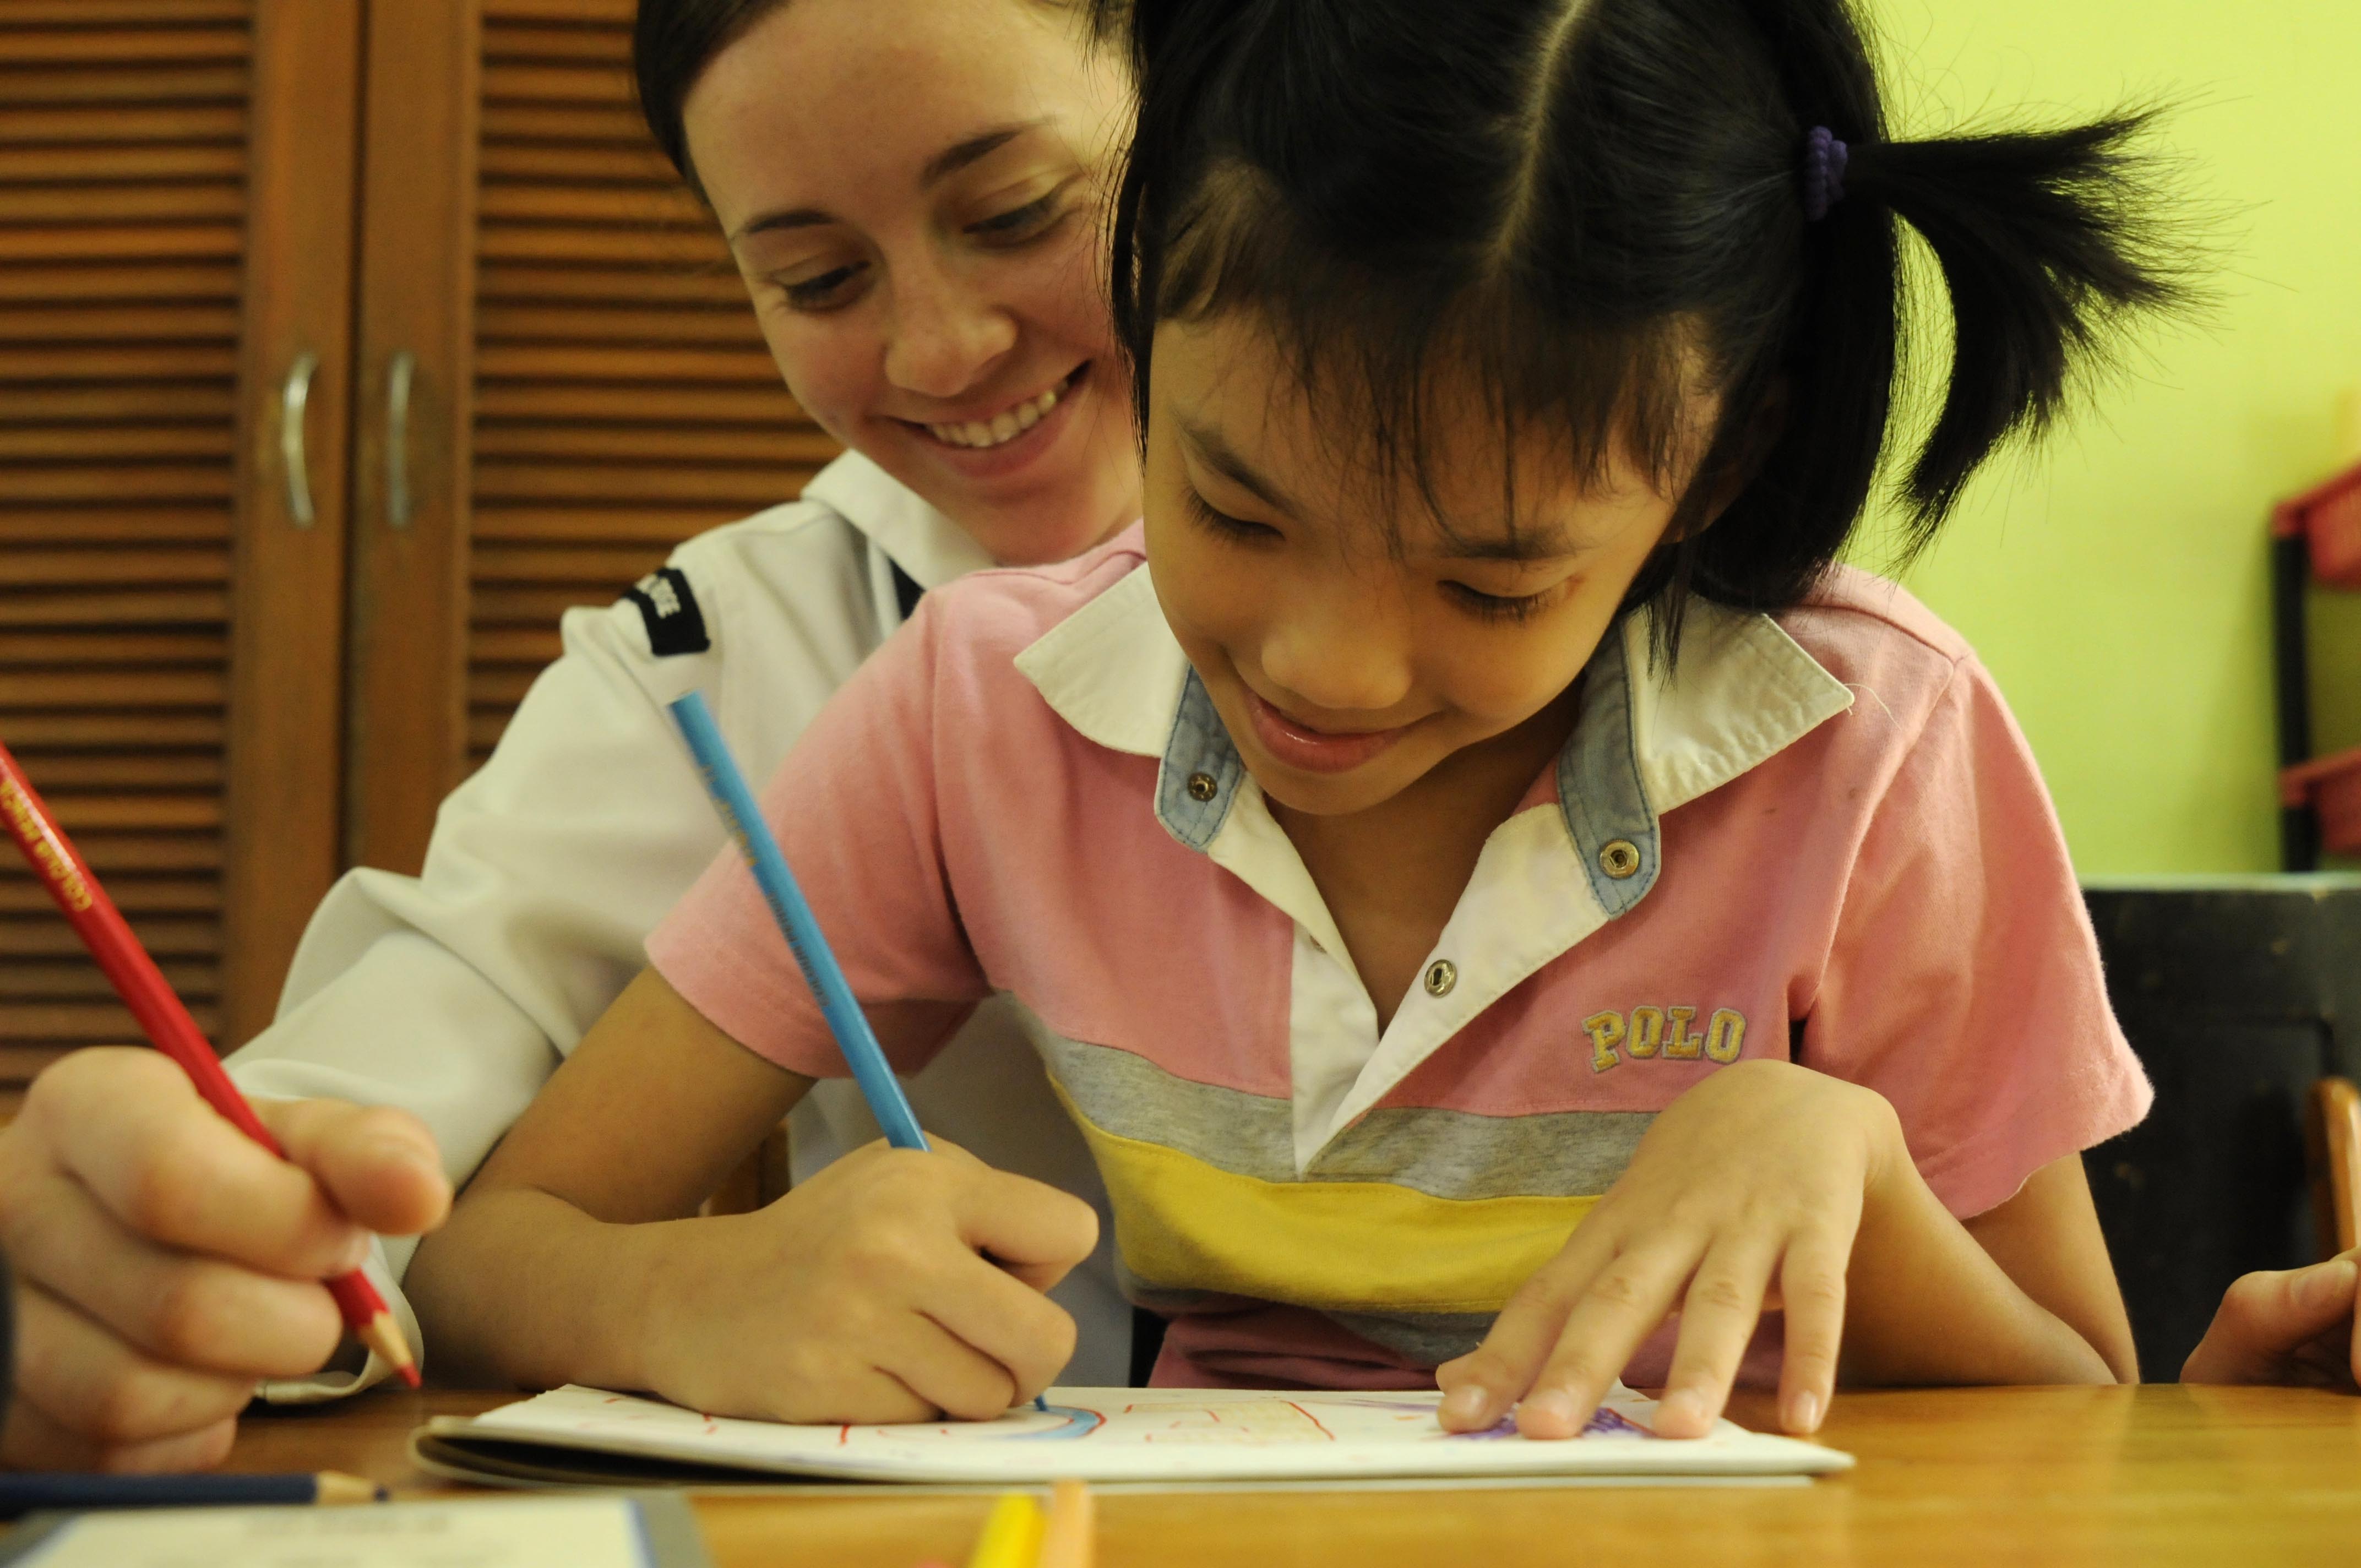 A woman helping a young girl with her homework.